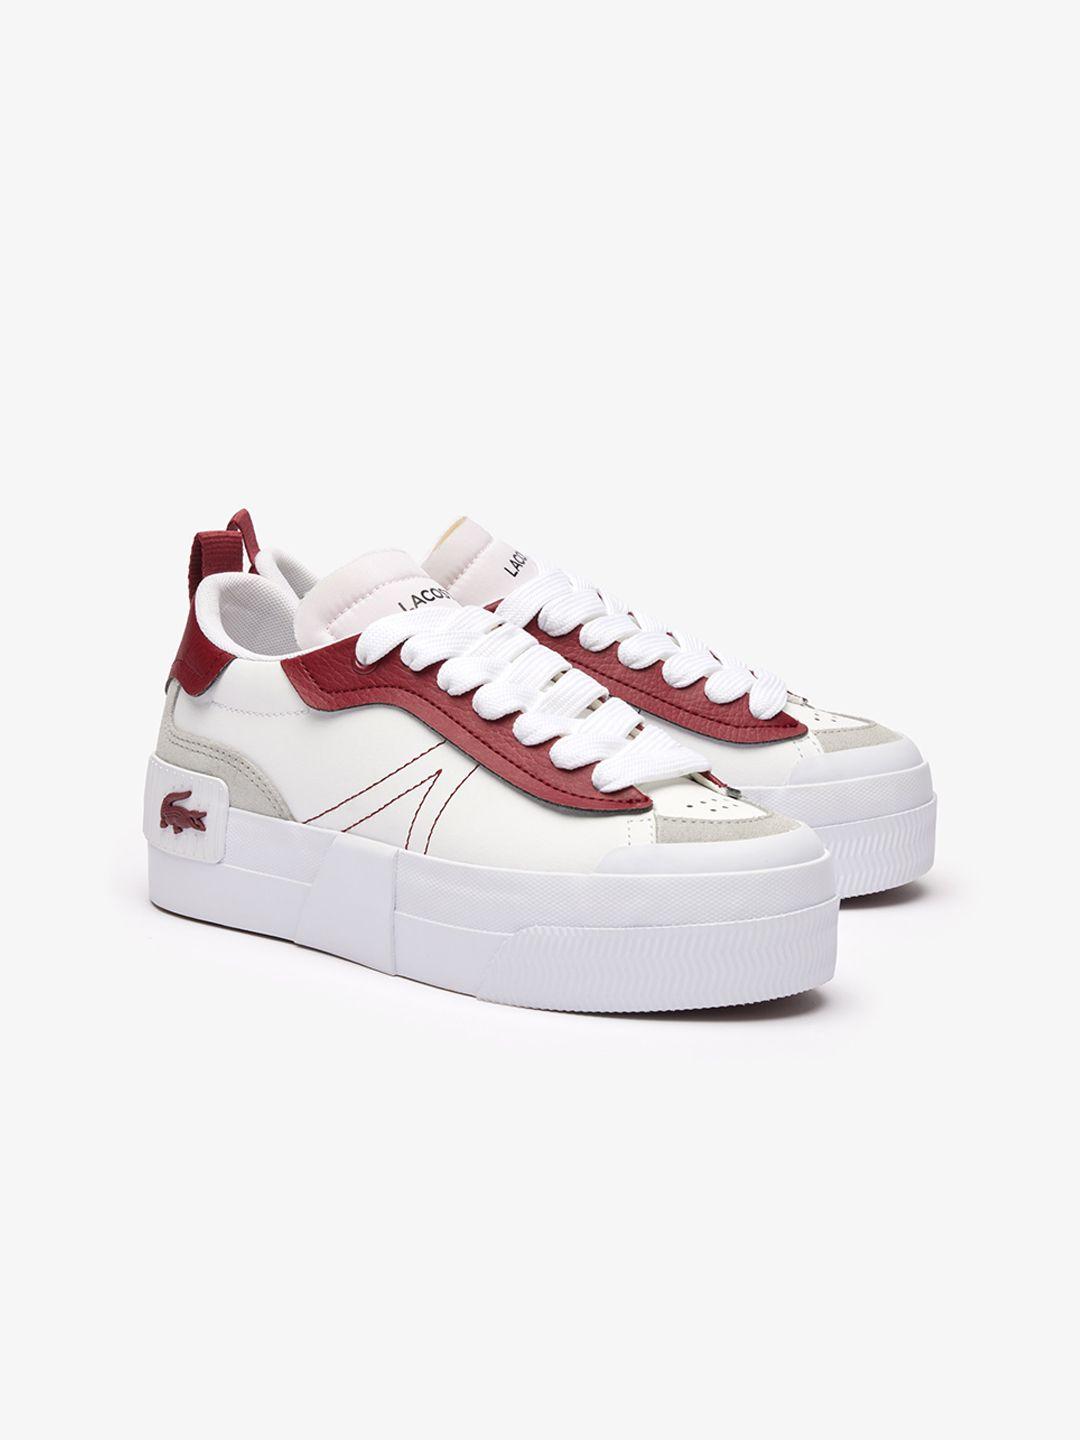 lacoste-women-colourblocked-leather-comfort-insole-basics-sneakers